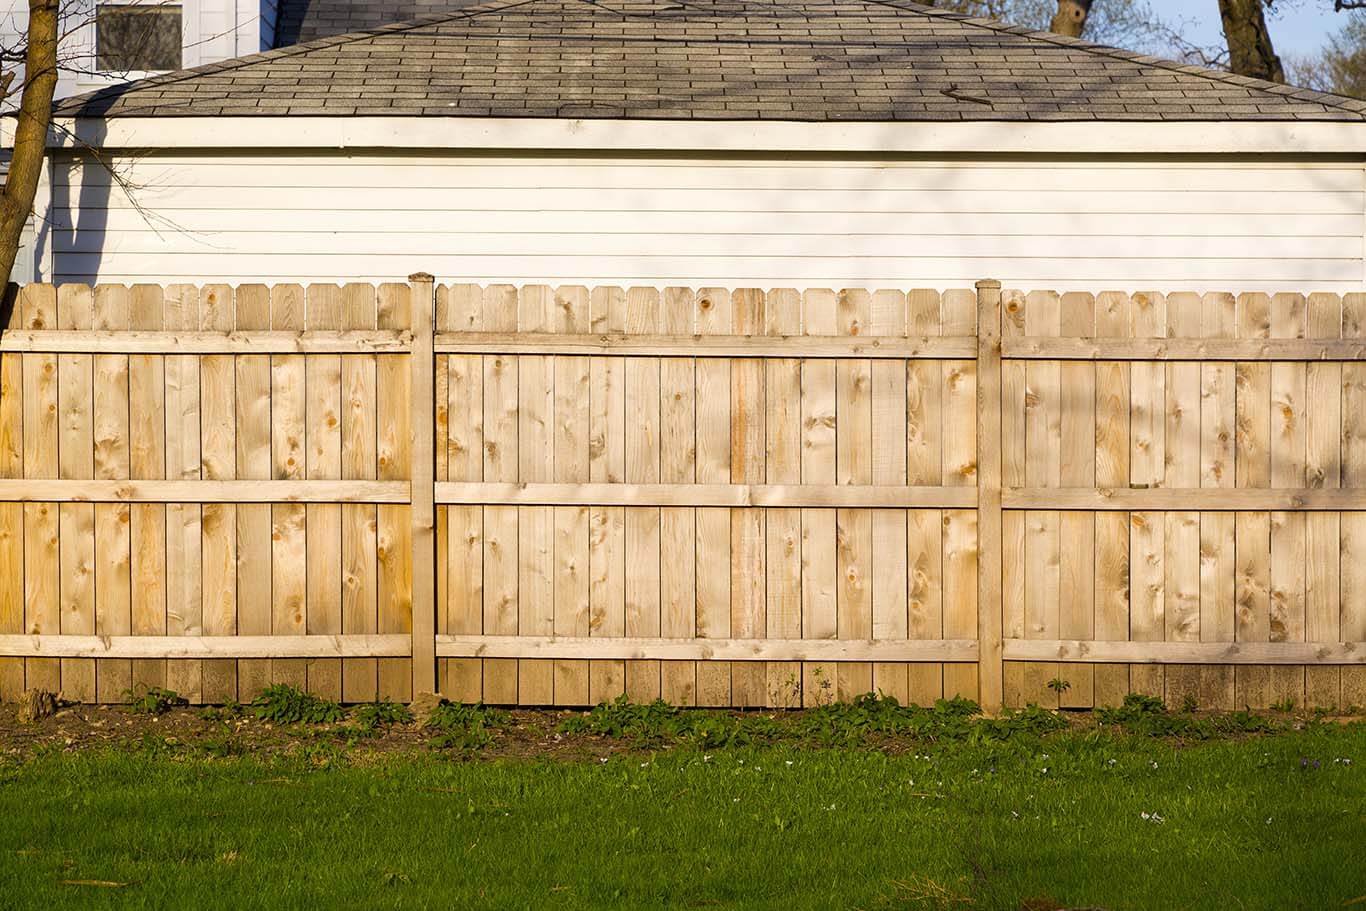 Wood privacy fence